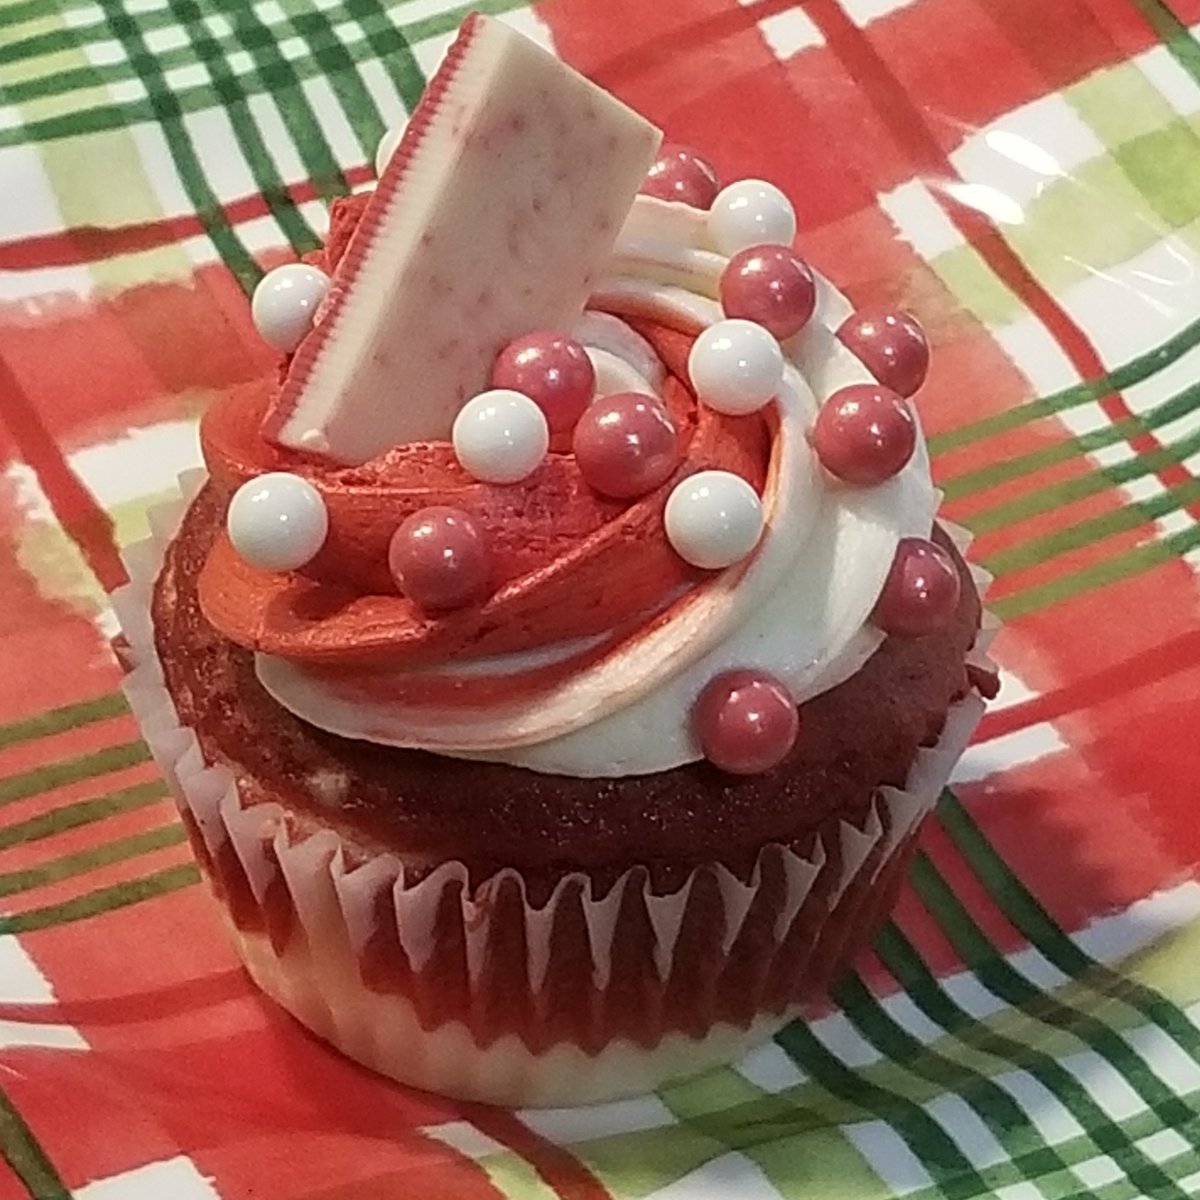 On the 22nd of December, Flour Child created for me Andes peppermint swirl with peppermint candies!

flourchildcreations.com/25-days-of-cre…

#CAKEBUS #FlourChildCreations #topthat #onlyinwanamingo  #cakeeveryday #indulge #madeinmn #bakingtherapy #25daysofcupcakes #Andes #peppermintswirl